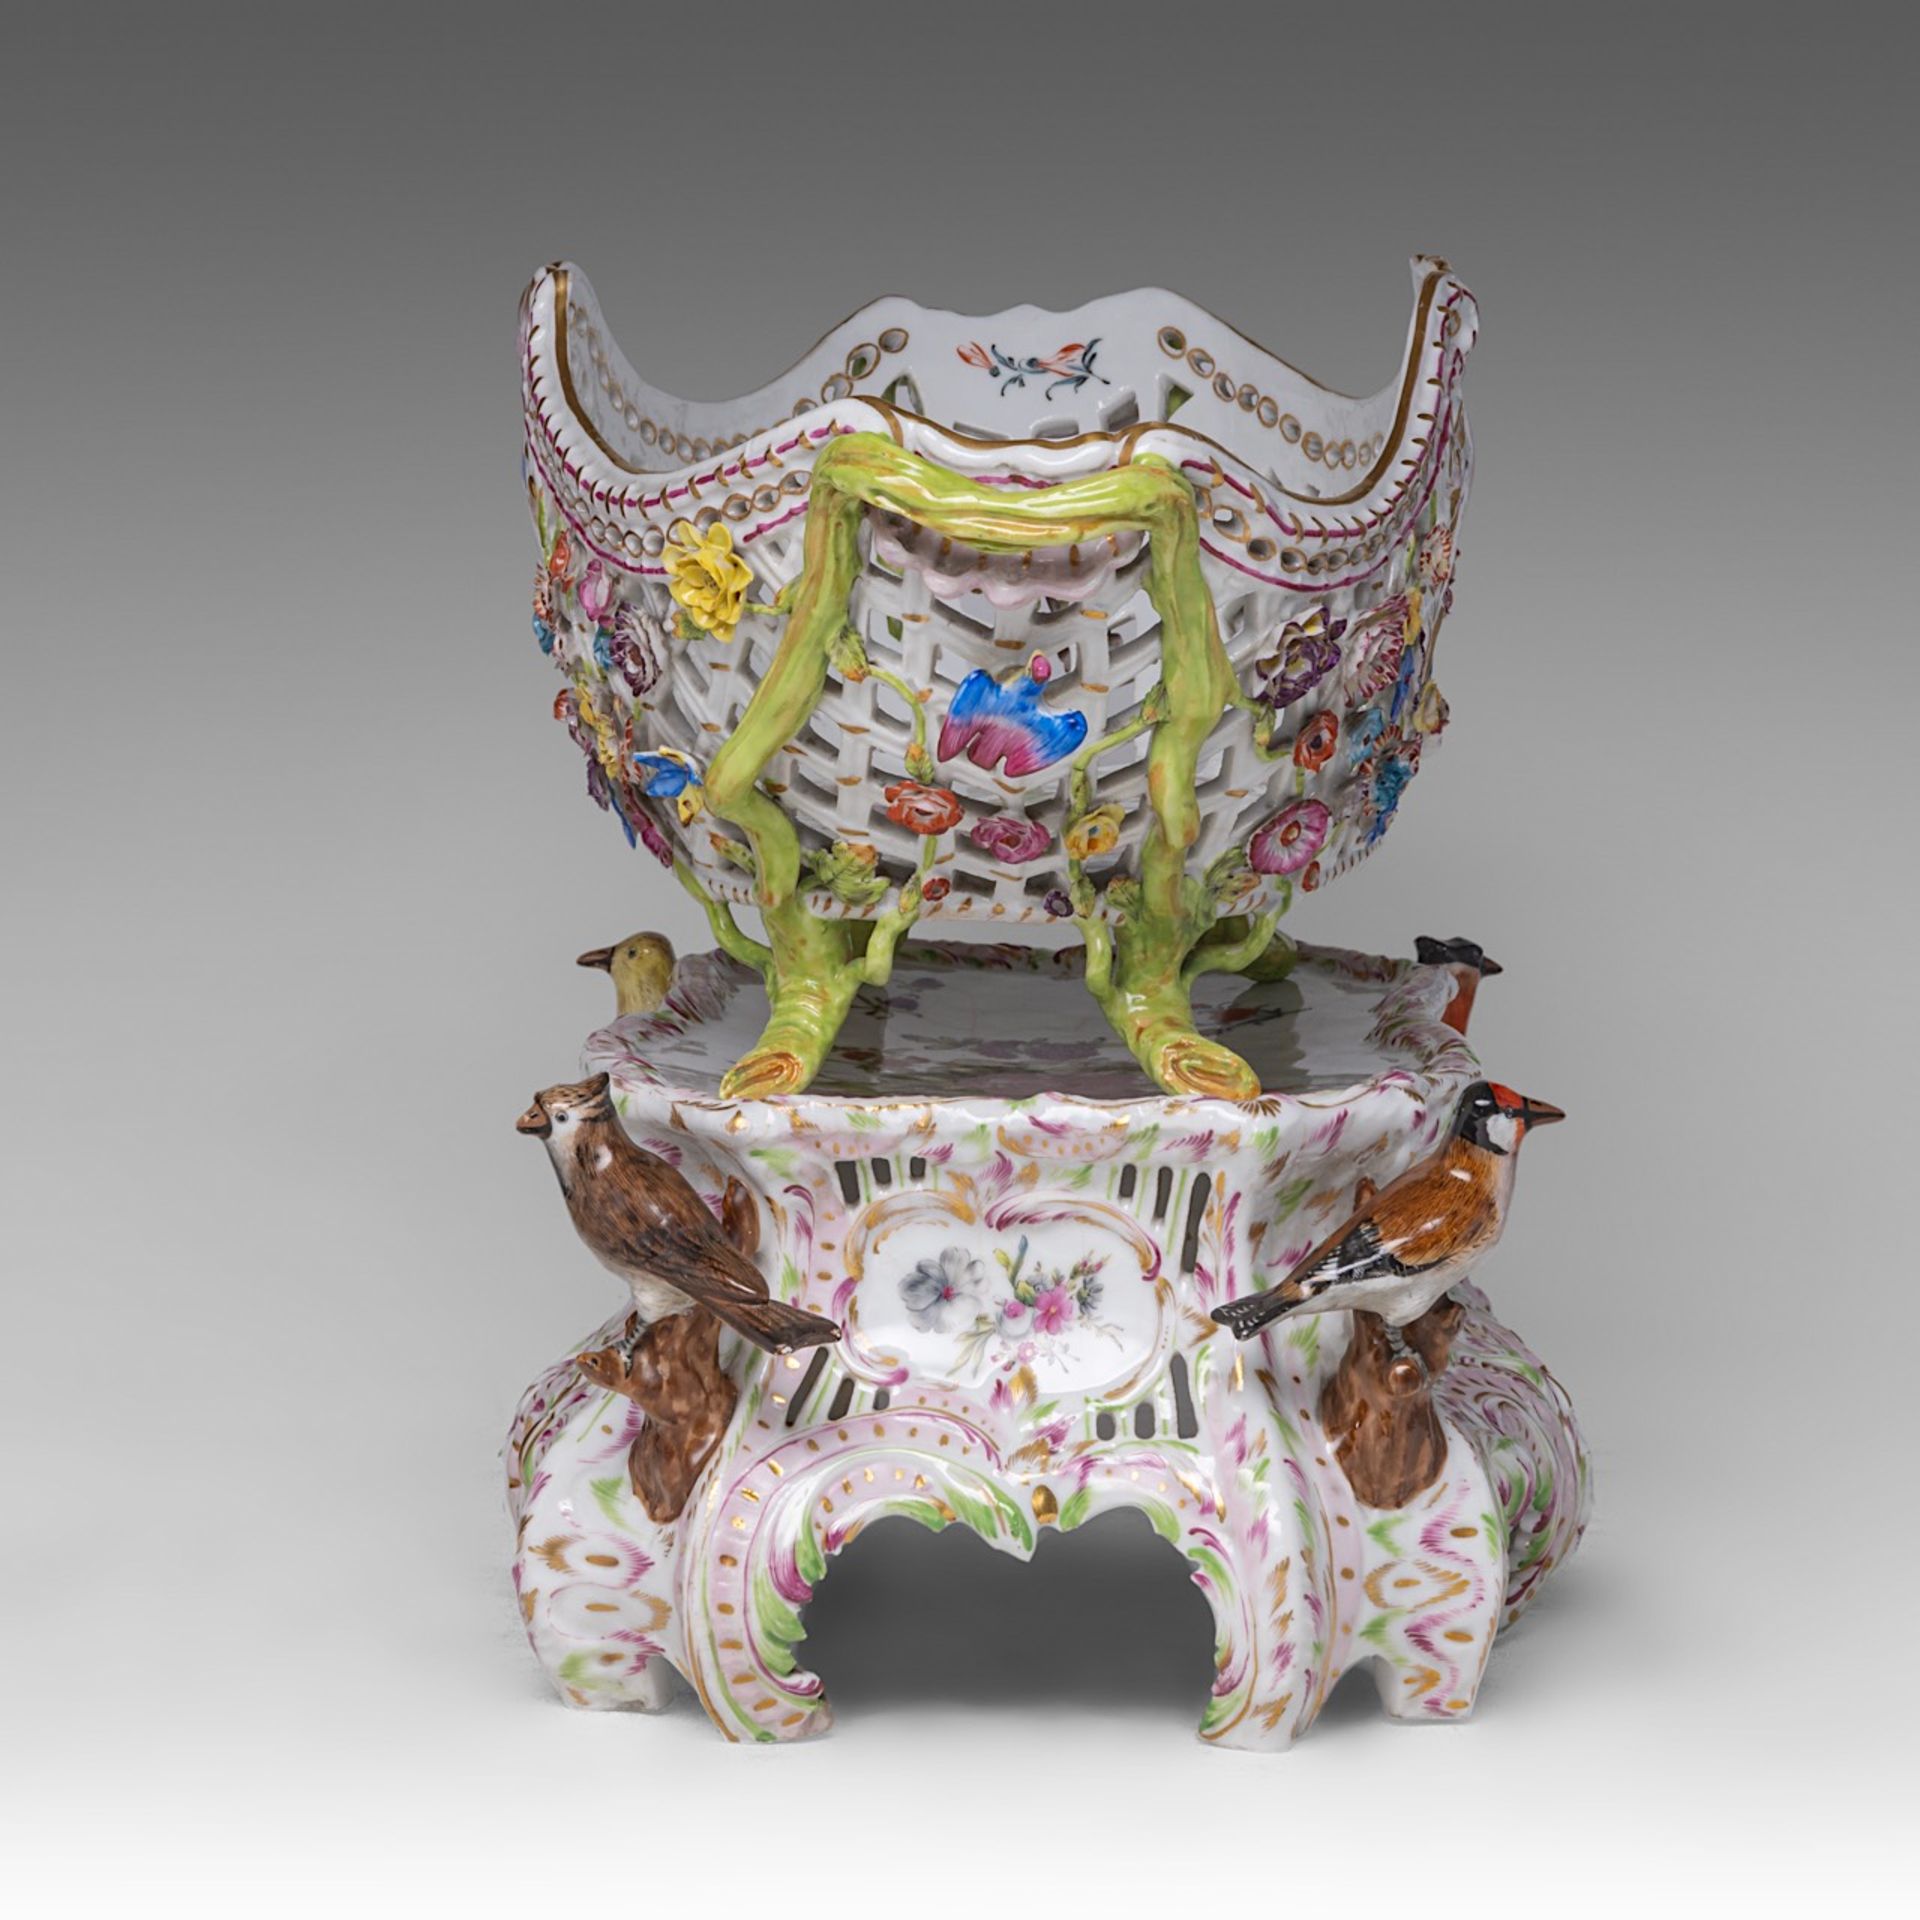 A polychrome Saxony porcelain basket on stand, decorated with modelled birds and flowers, H 33 - W 4 - Image 5 of 12